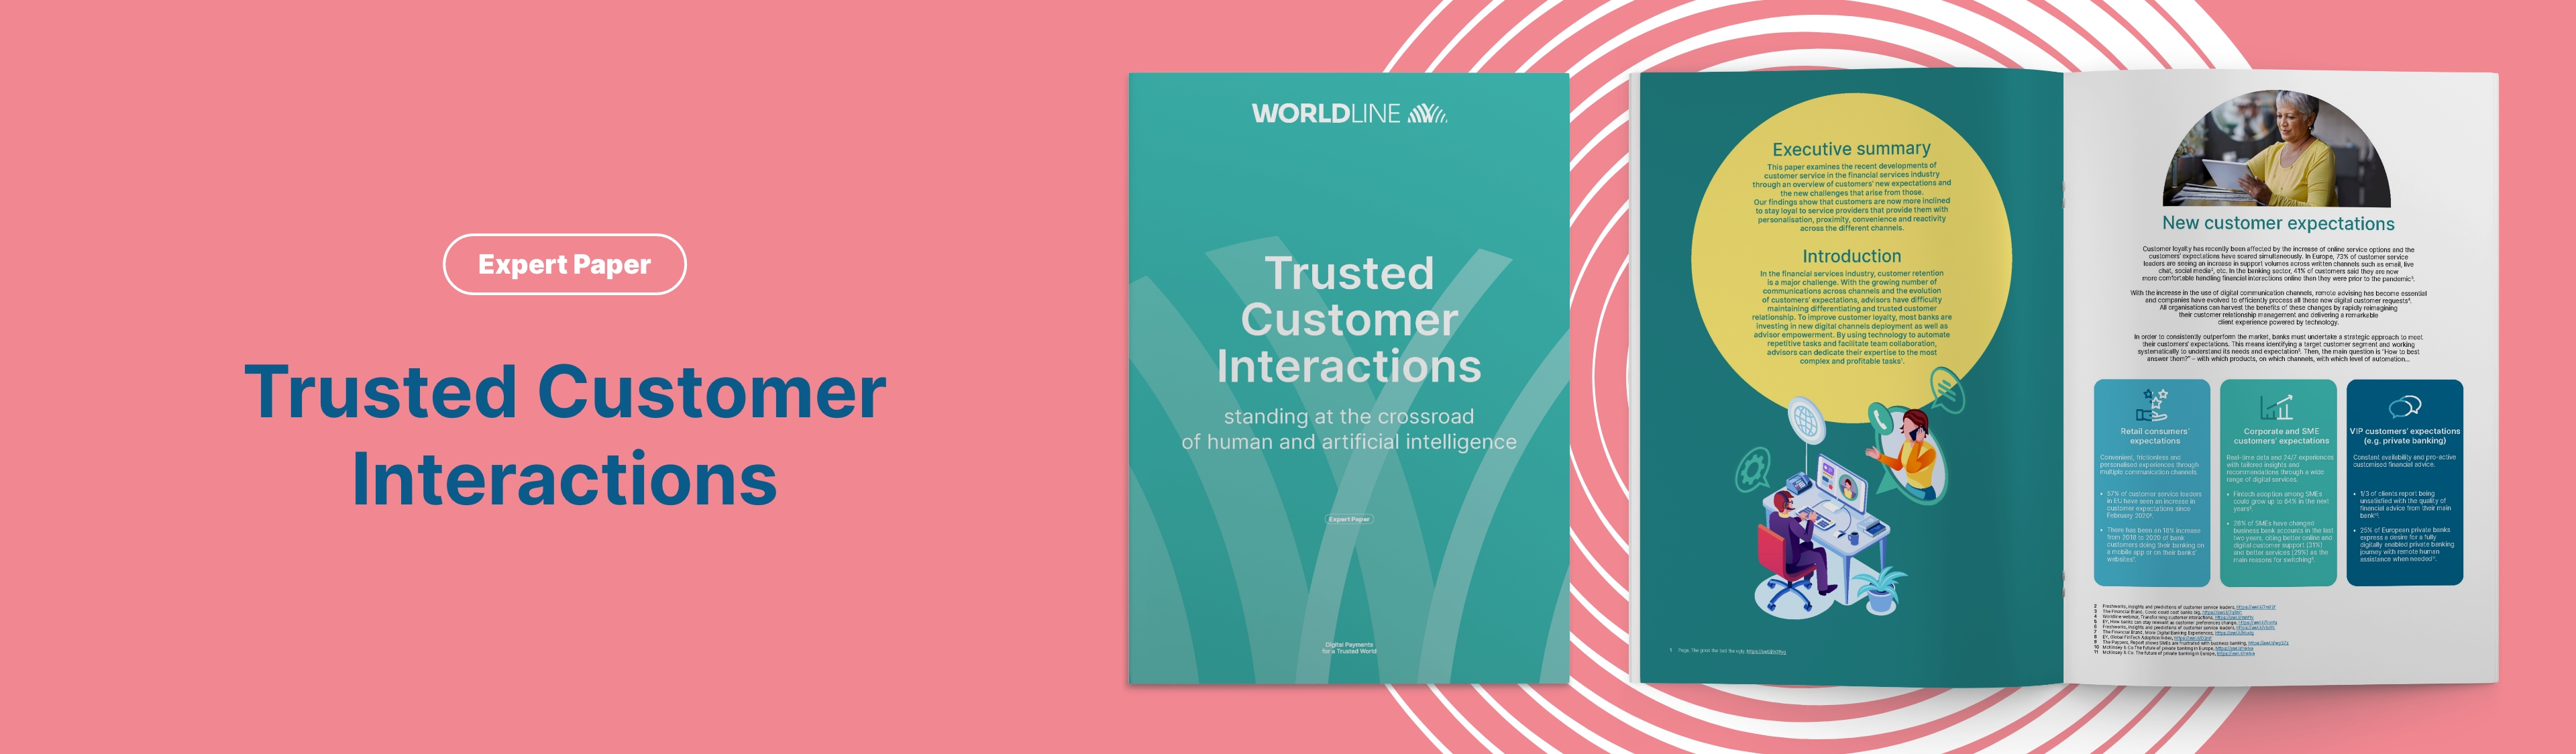 banner-trusted-customer-interactions